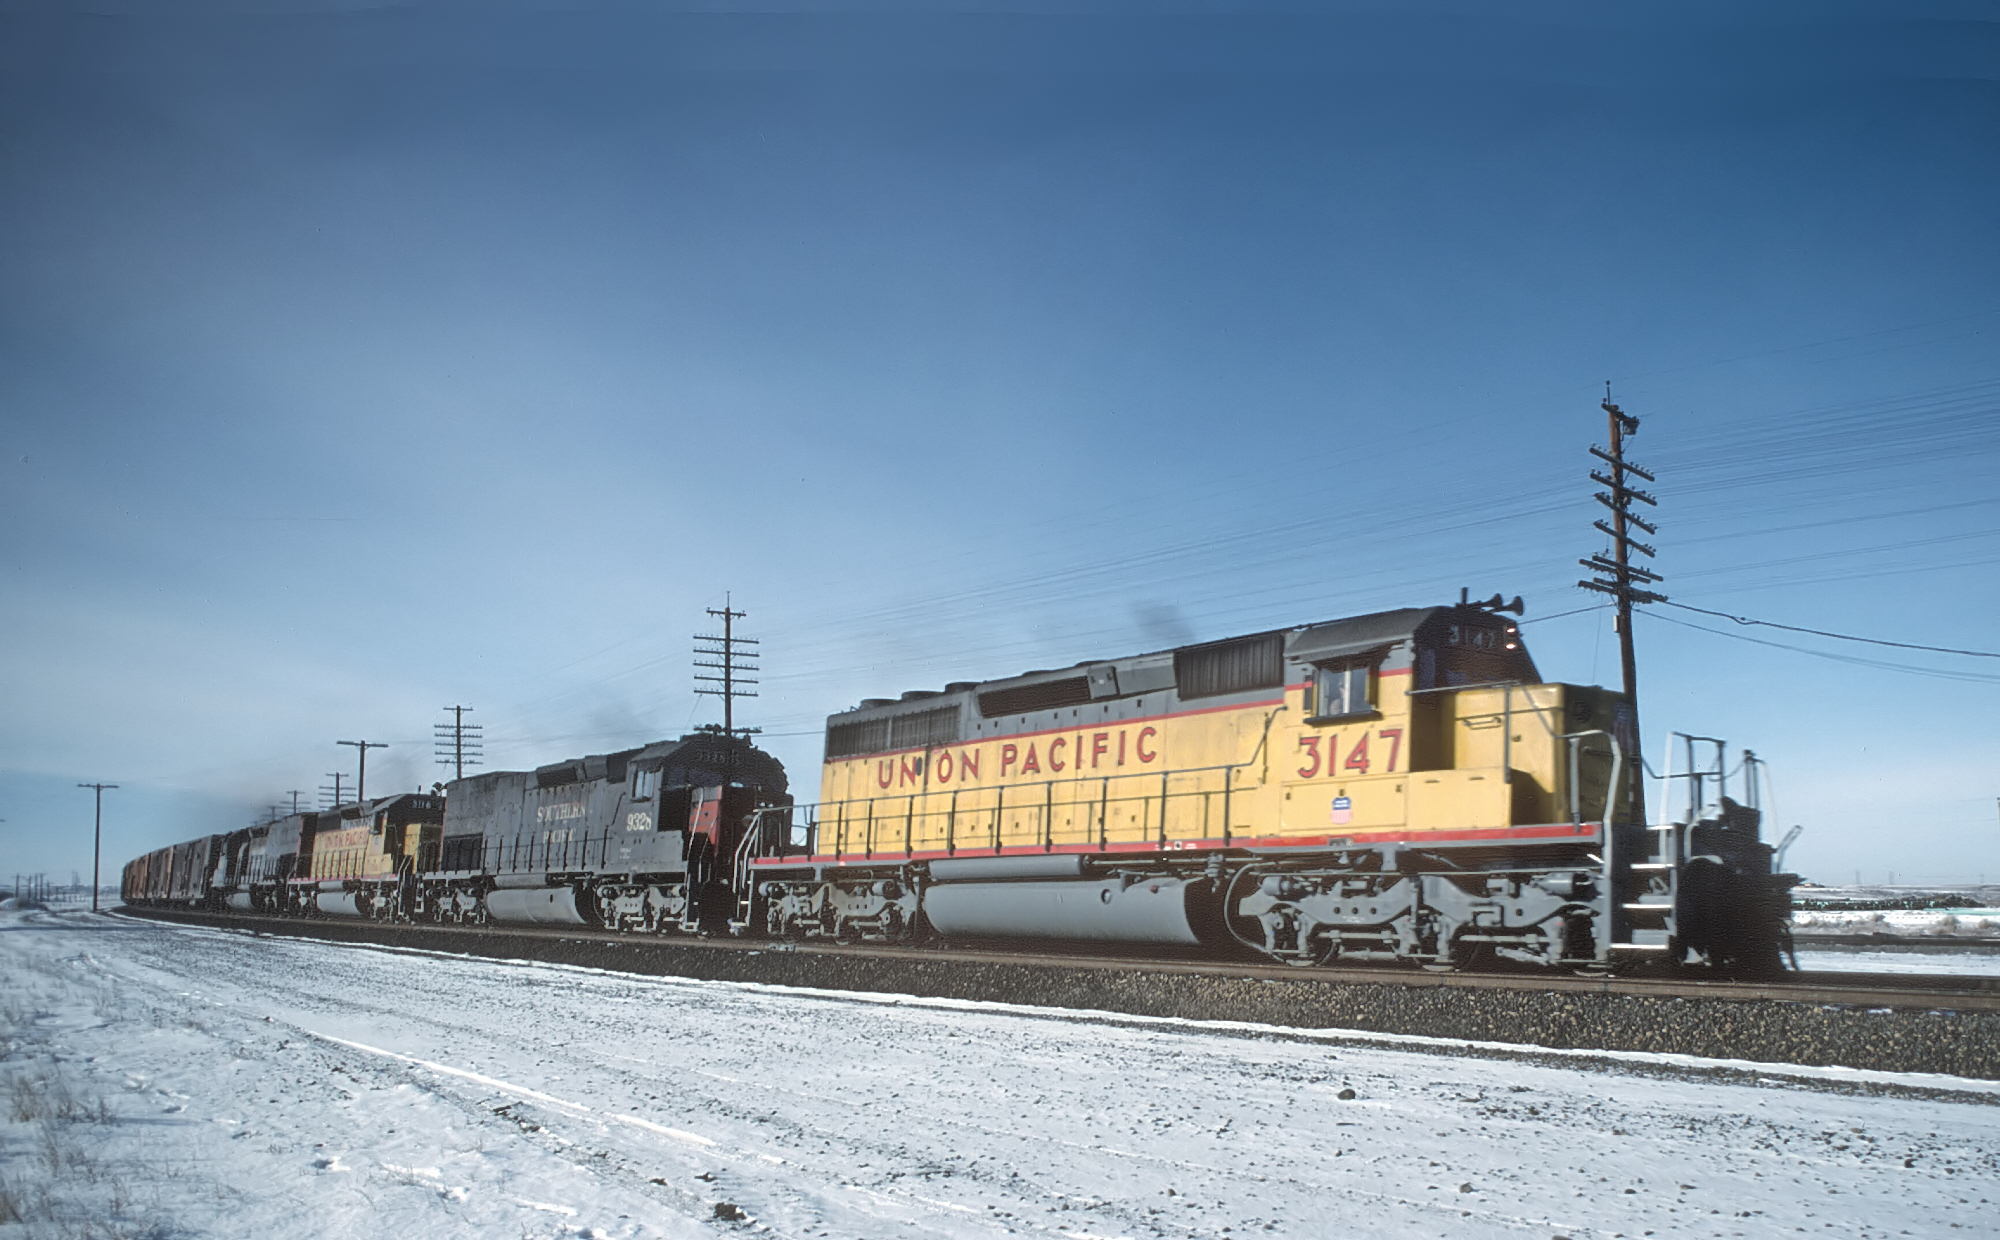 File:XnUP 3147 (SD40-2), SP 9328 (SD45T-2), and UP 3116 (SD40) at